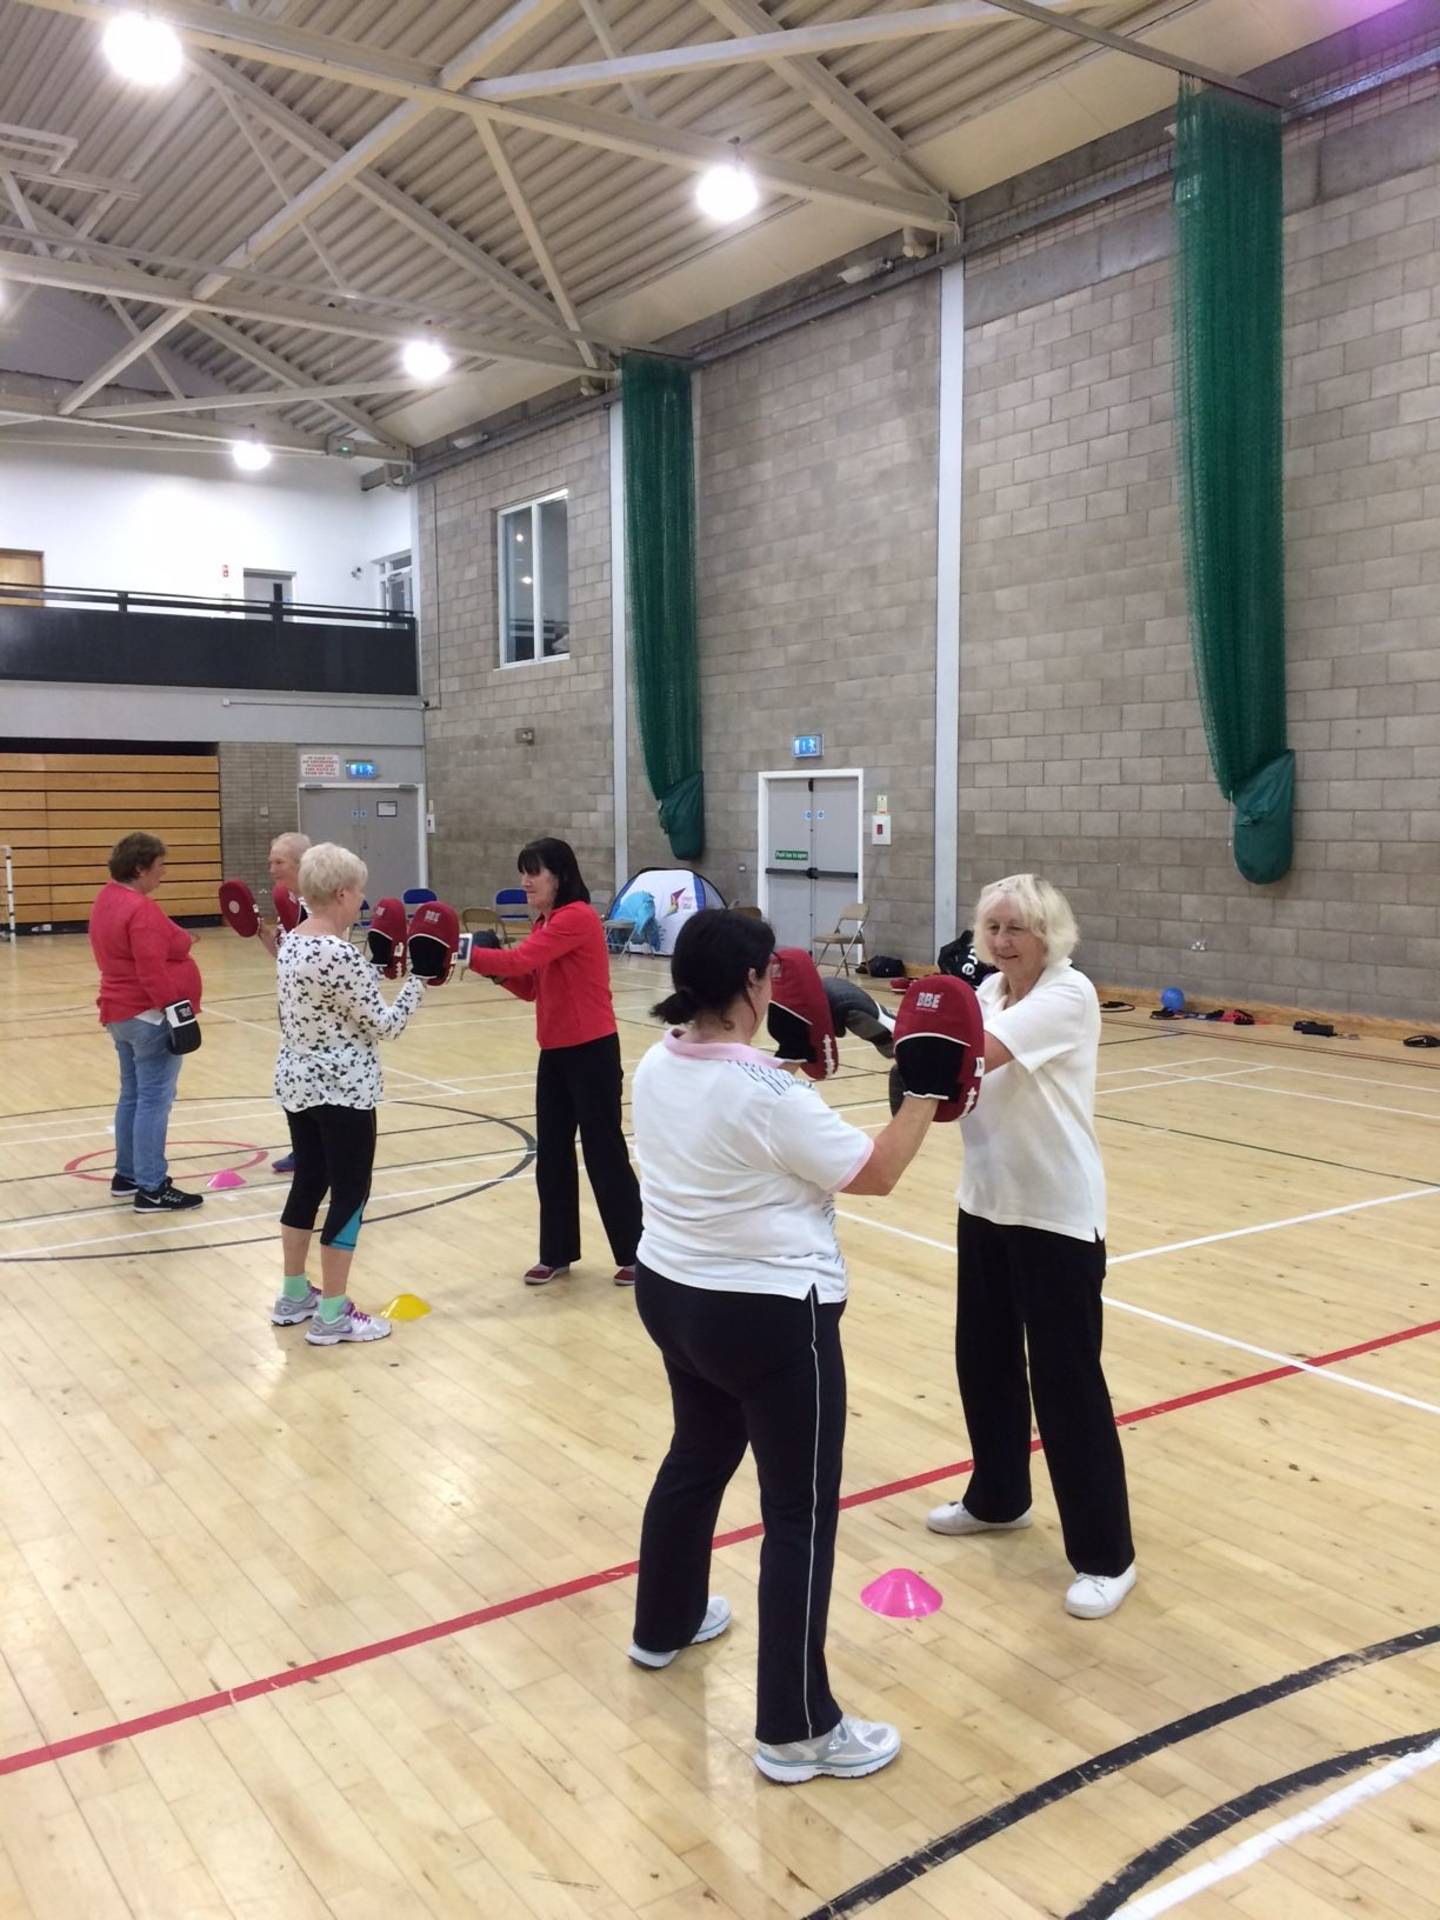 Women exercising together in Northern Ireland